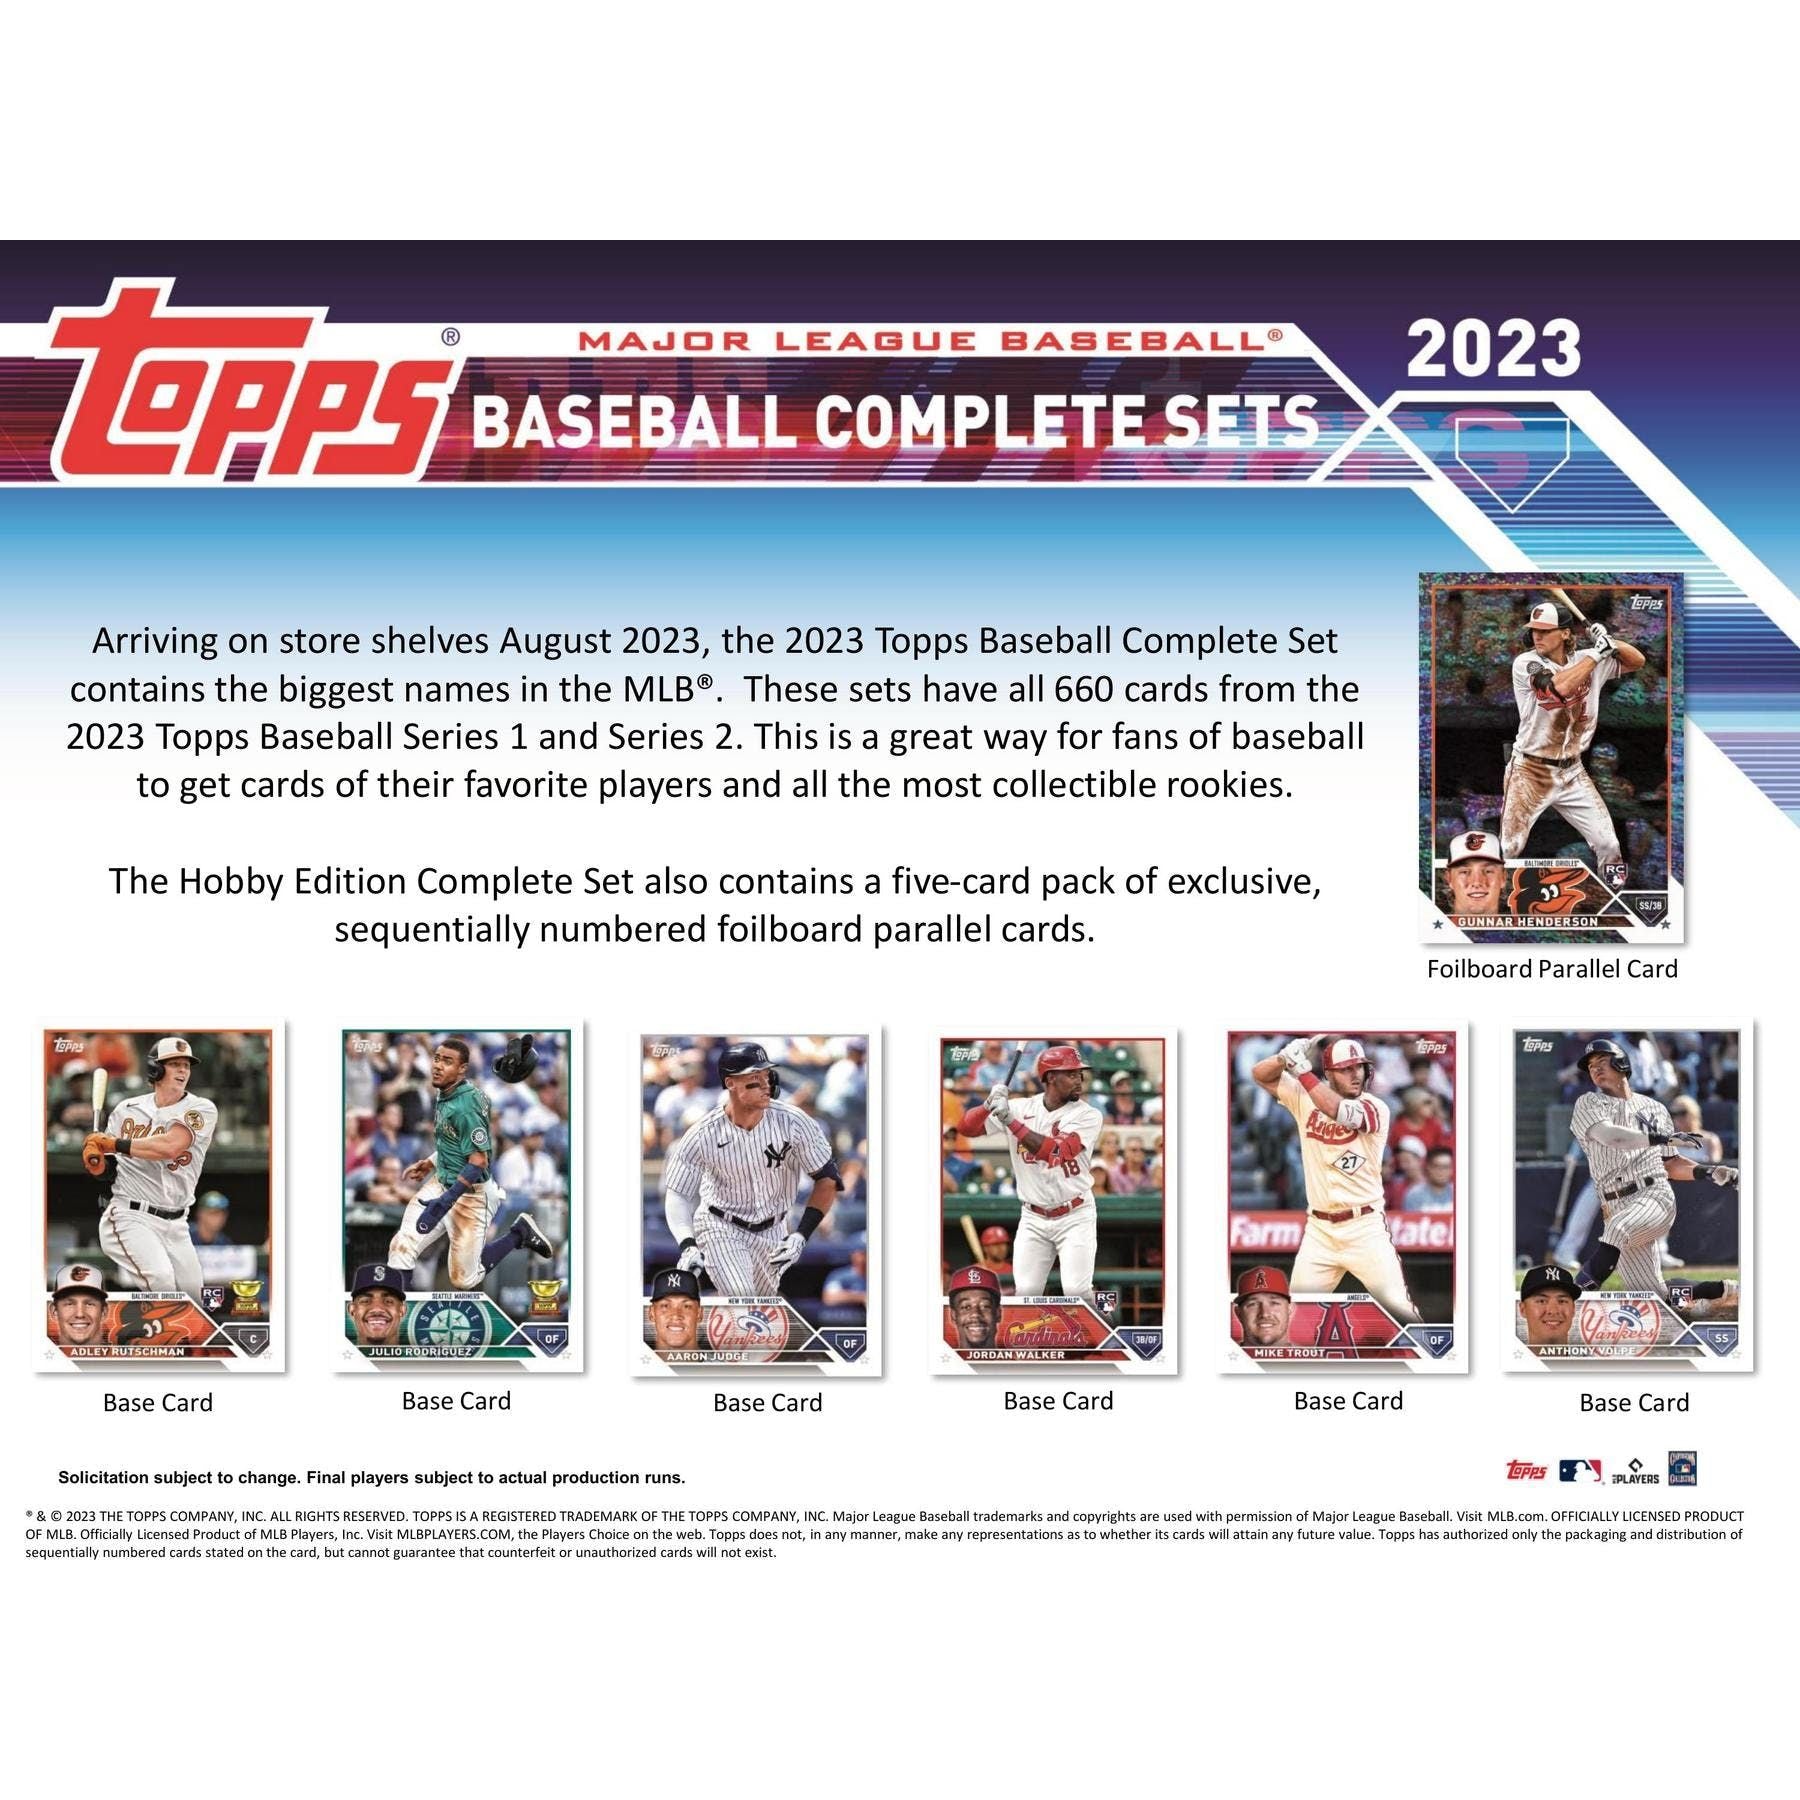 2023 Topps Baseball Complete Factory Set (Hobby Edition) 887521120161 - King Card Canada